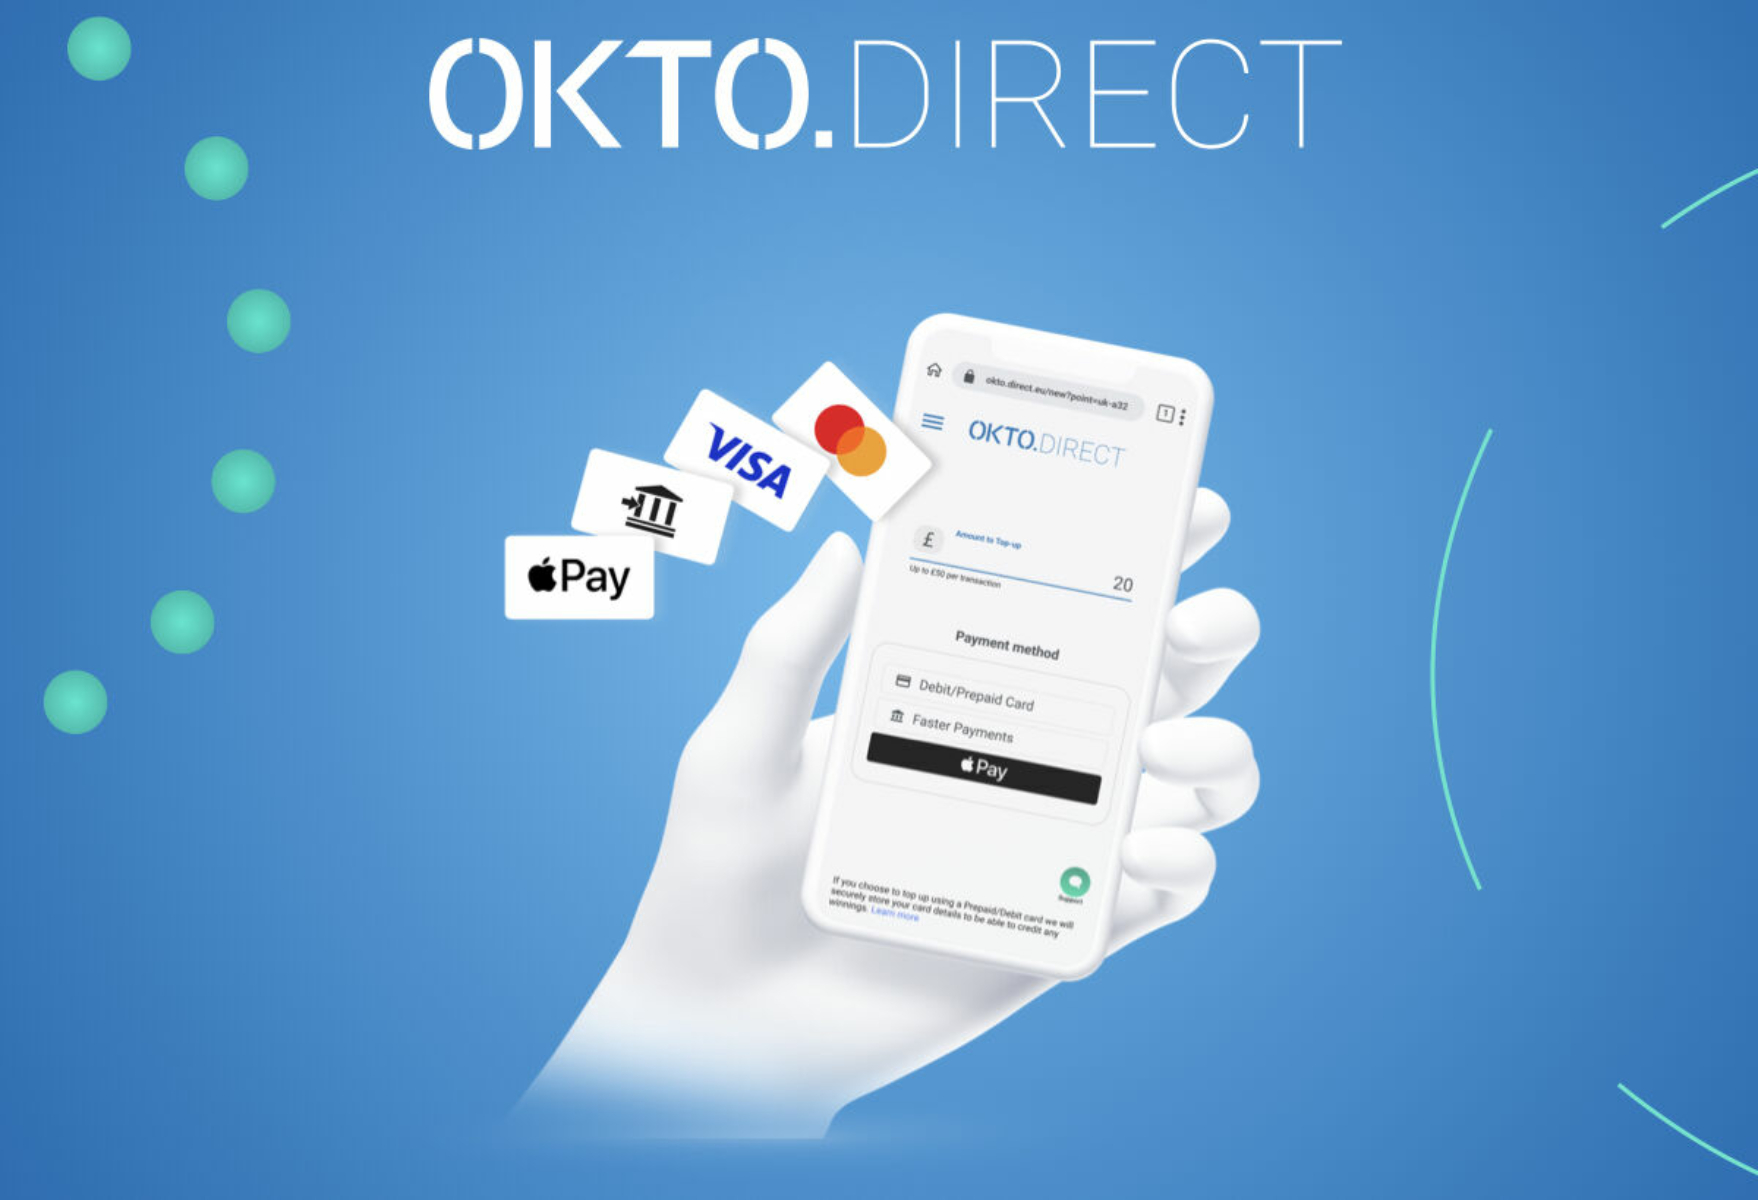 OKTO launches another major retail payment innovation at ICE London